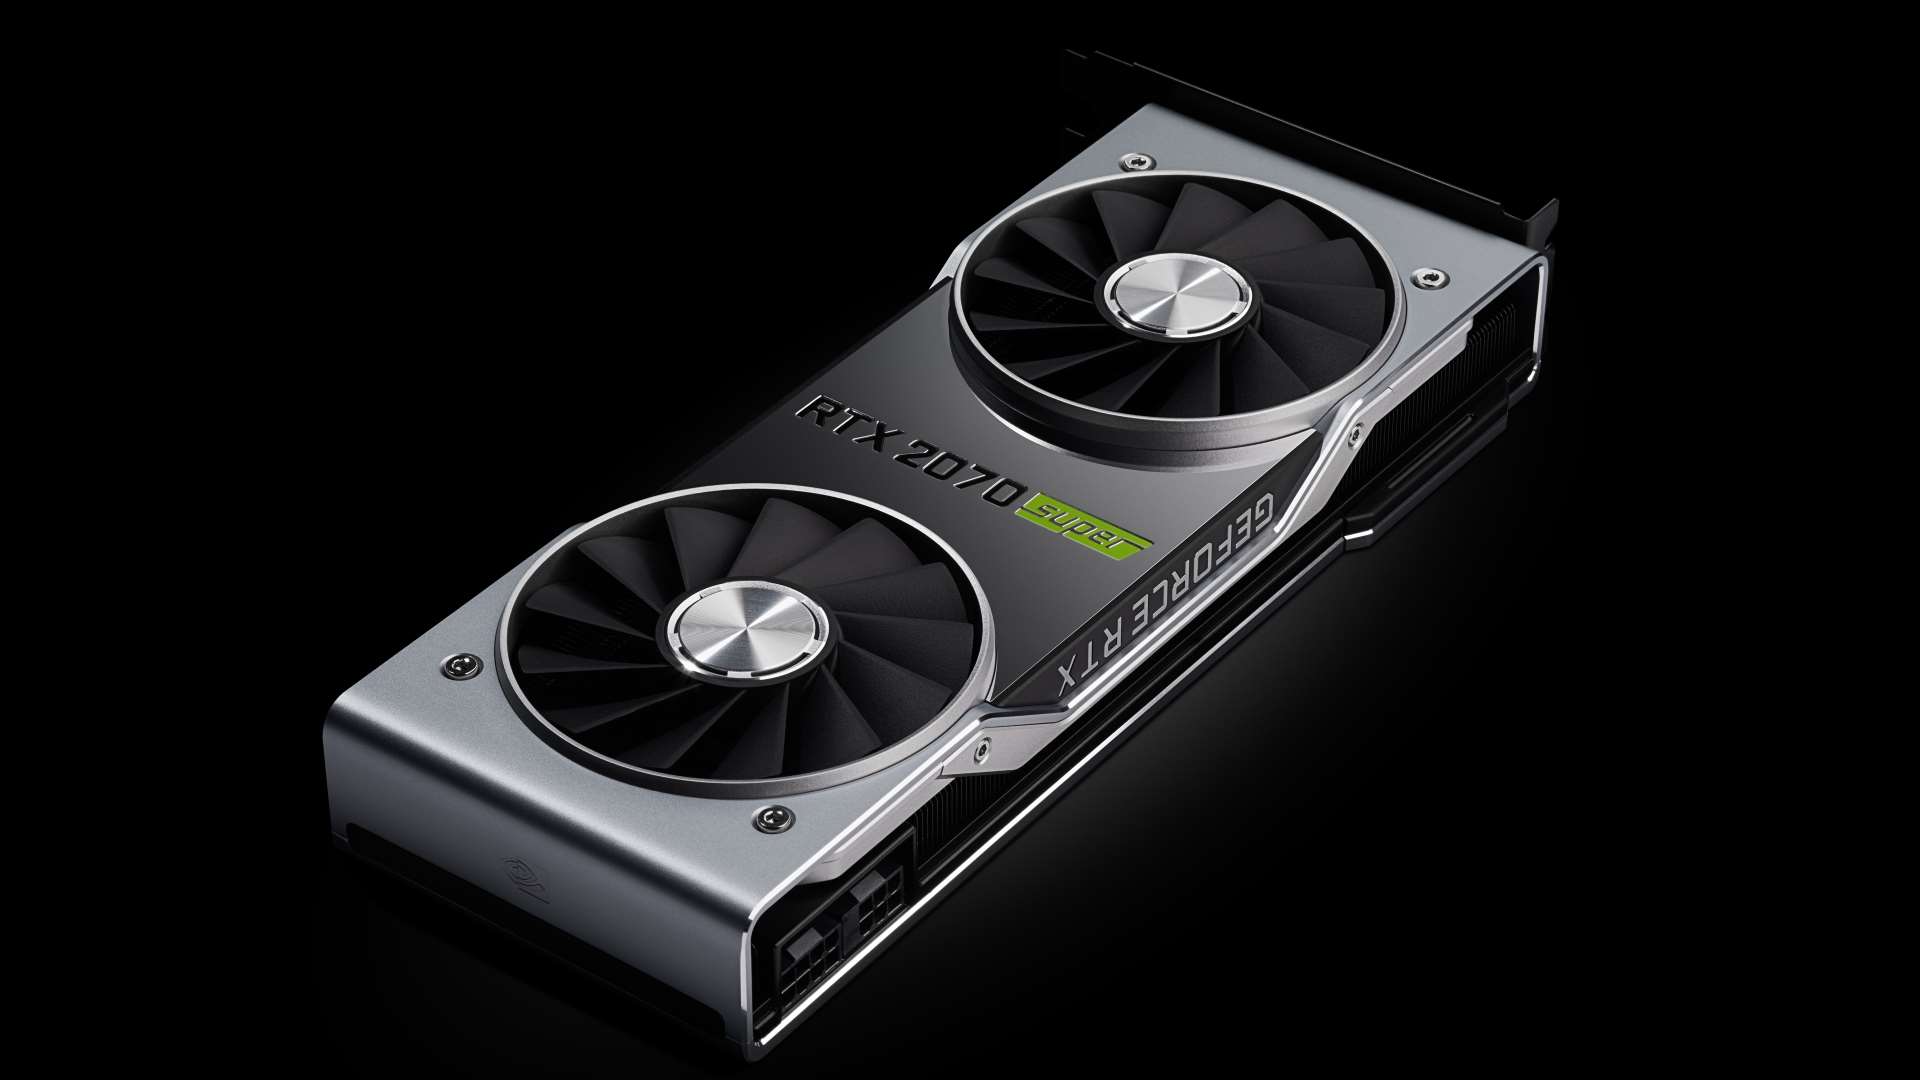 Nvidia RTX 2070 Super review: the RX 